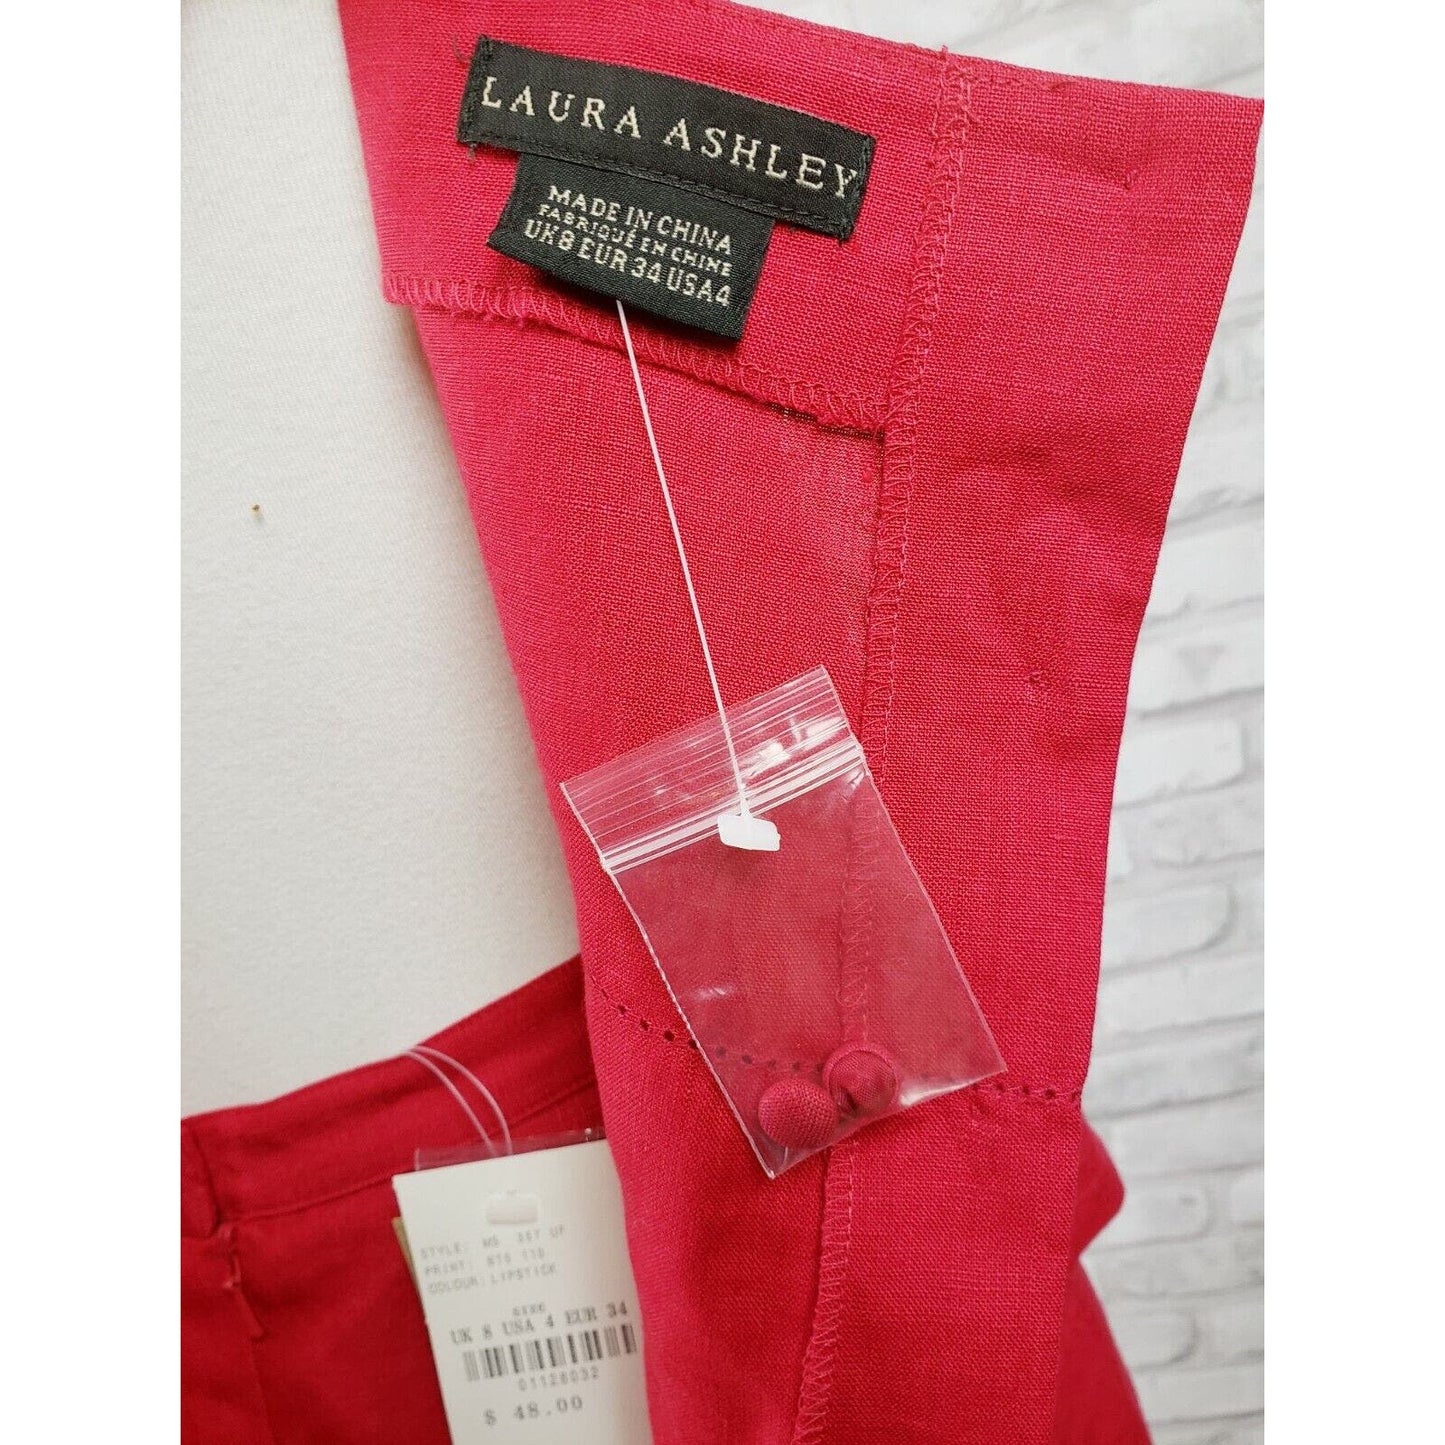 Laura Ashley size 4 camisole and pencil skirt set Lipstick red 100% linen